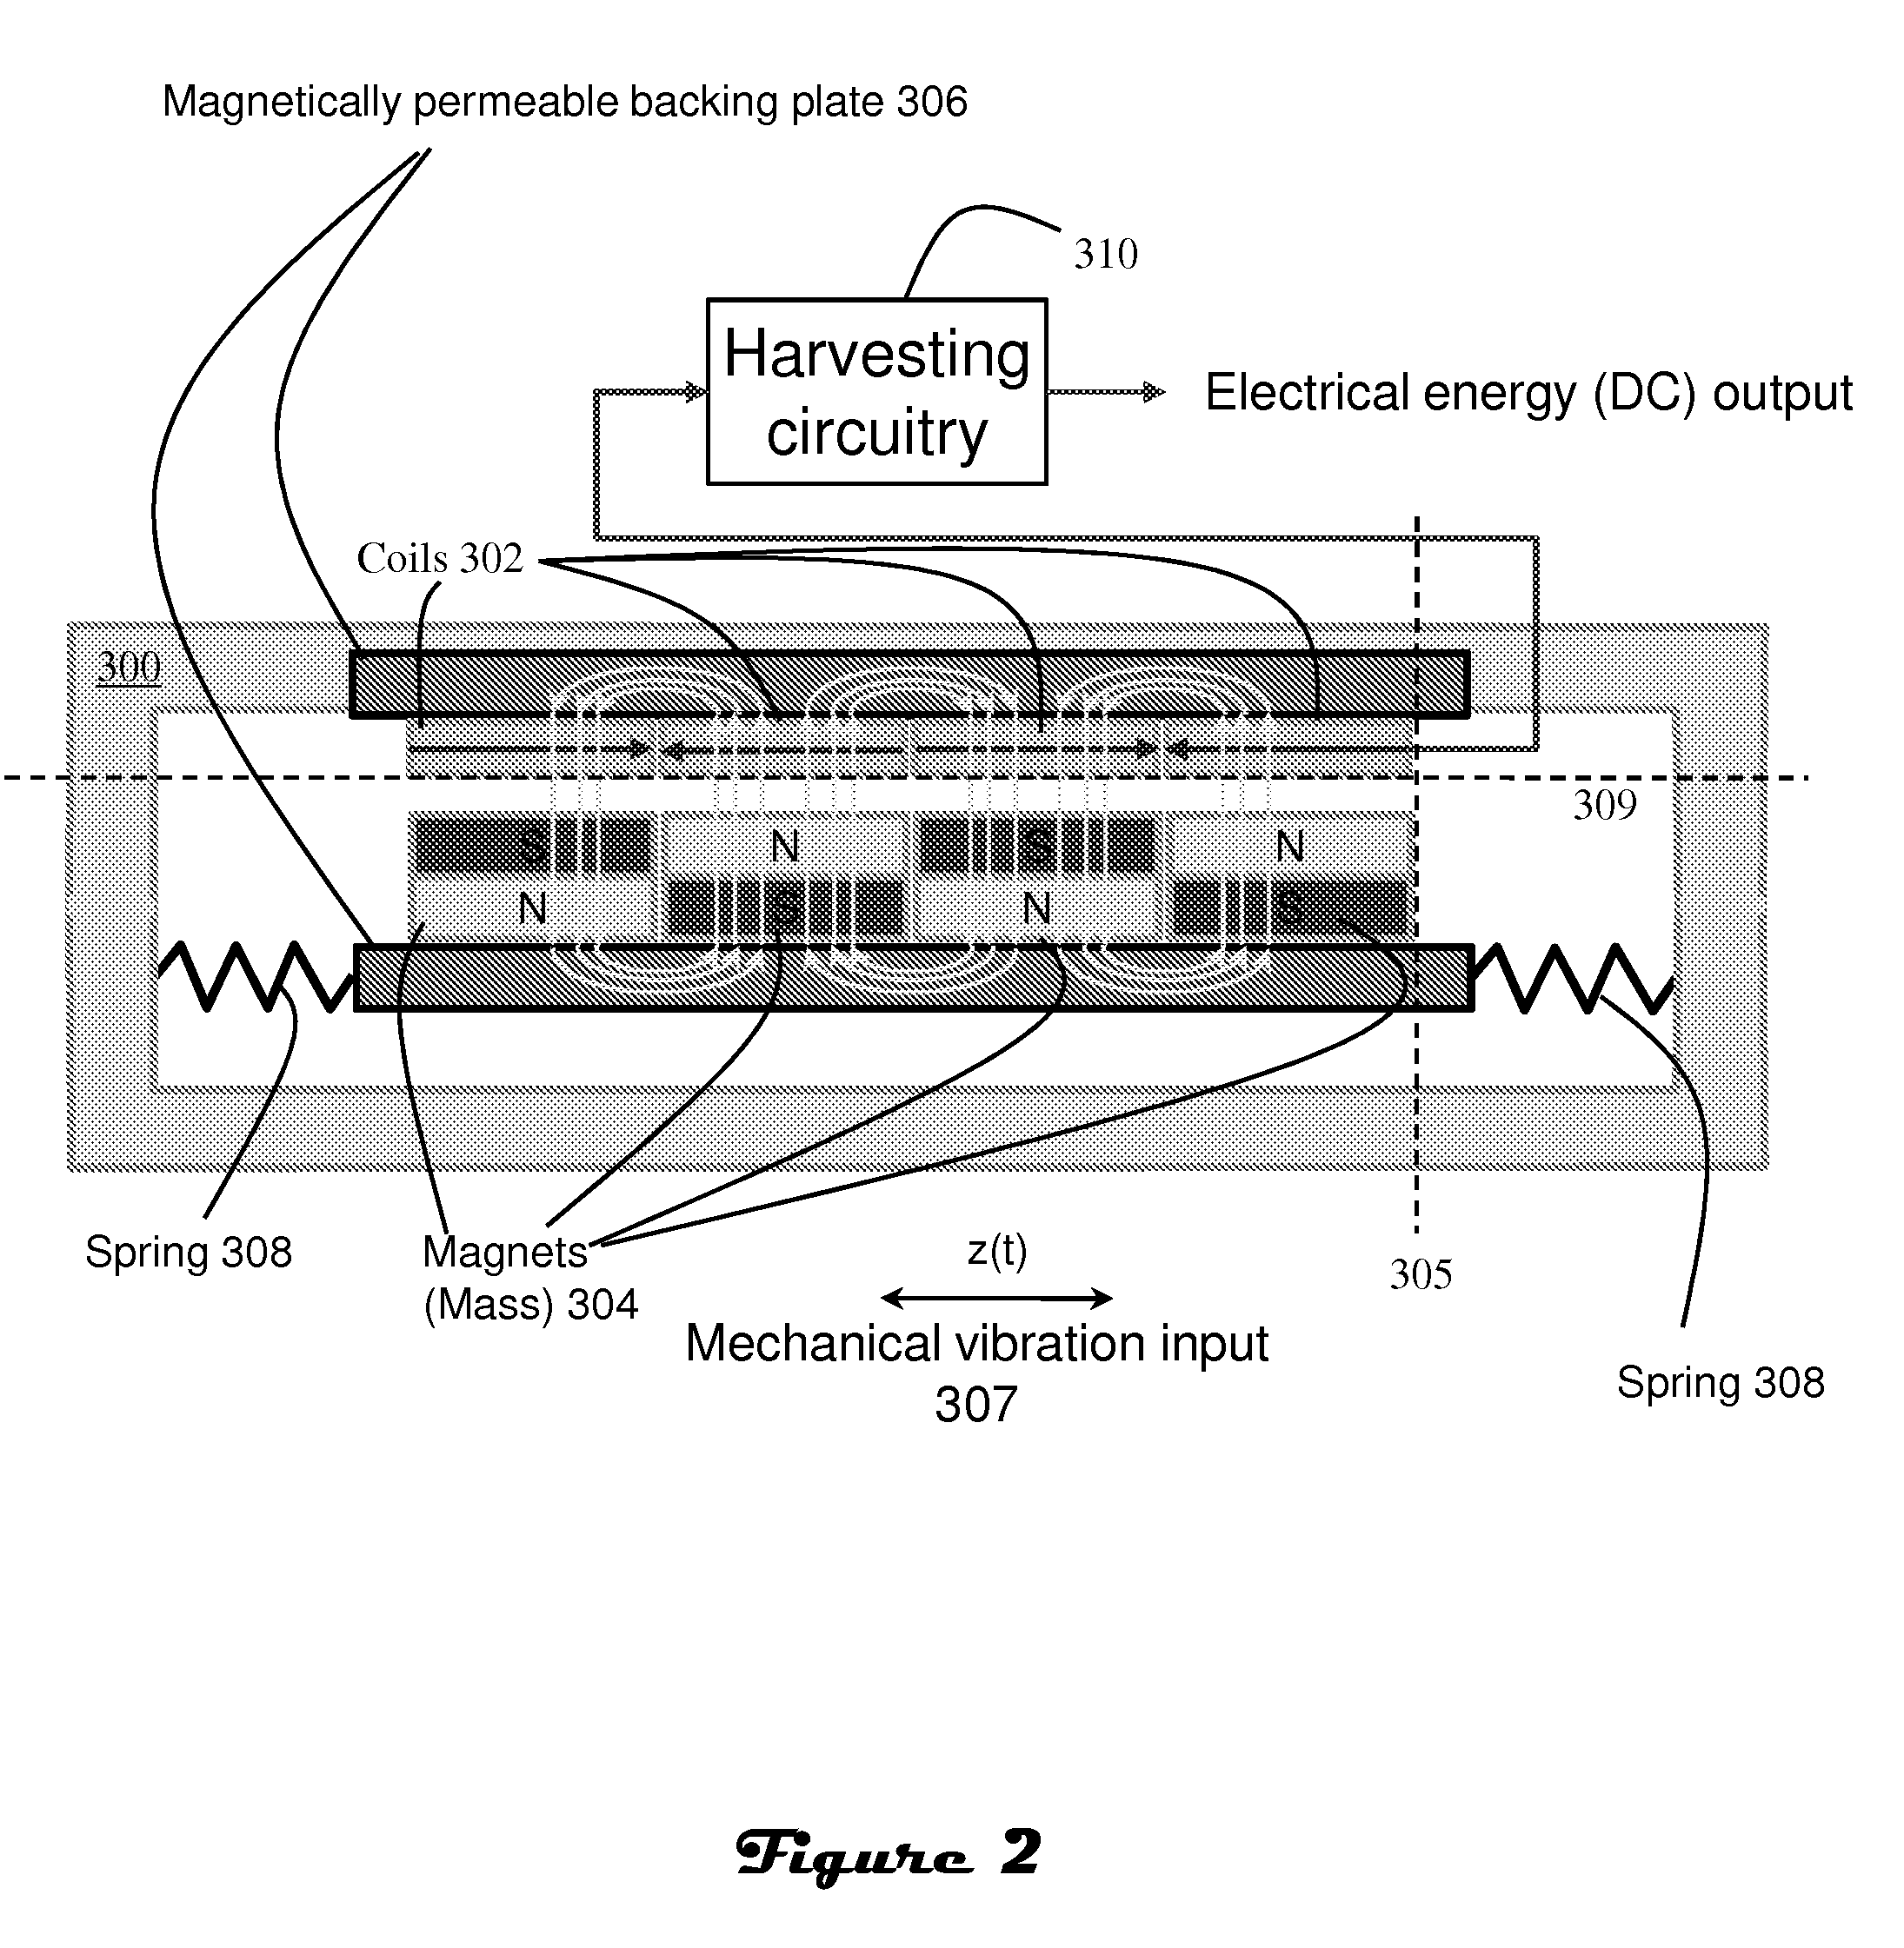 Electromagnetic device having compact flux paths for harvesting energy from vibrations